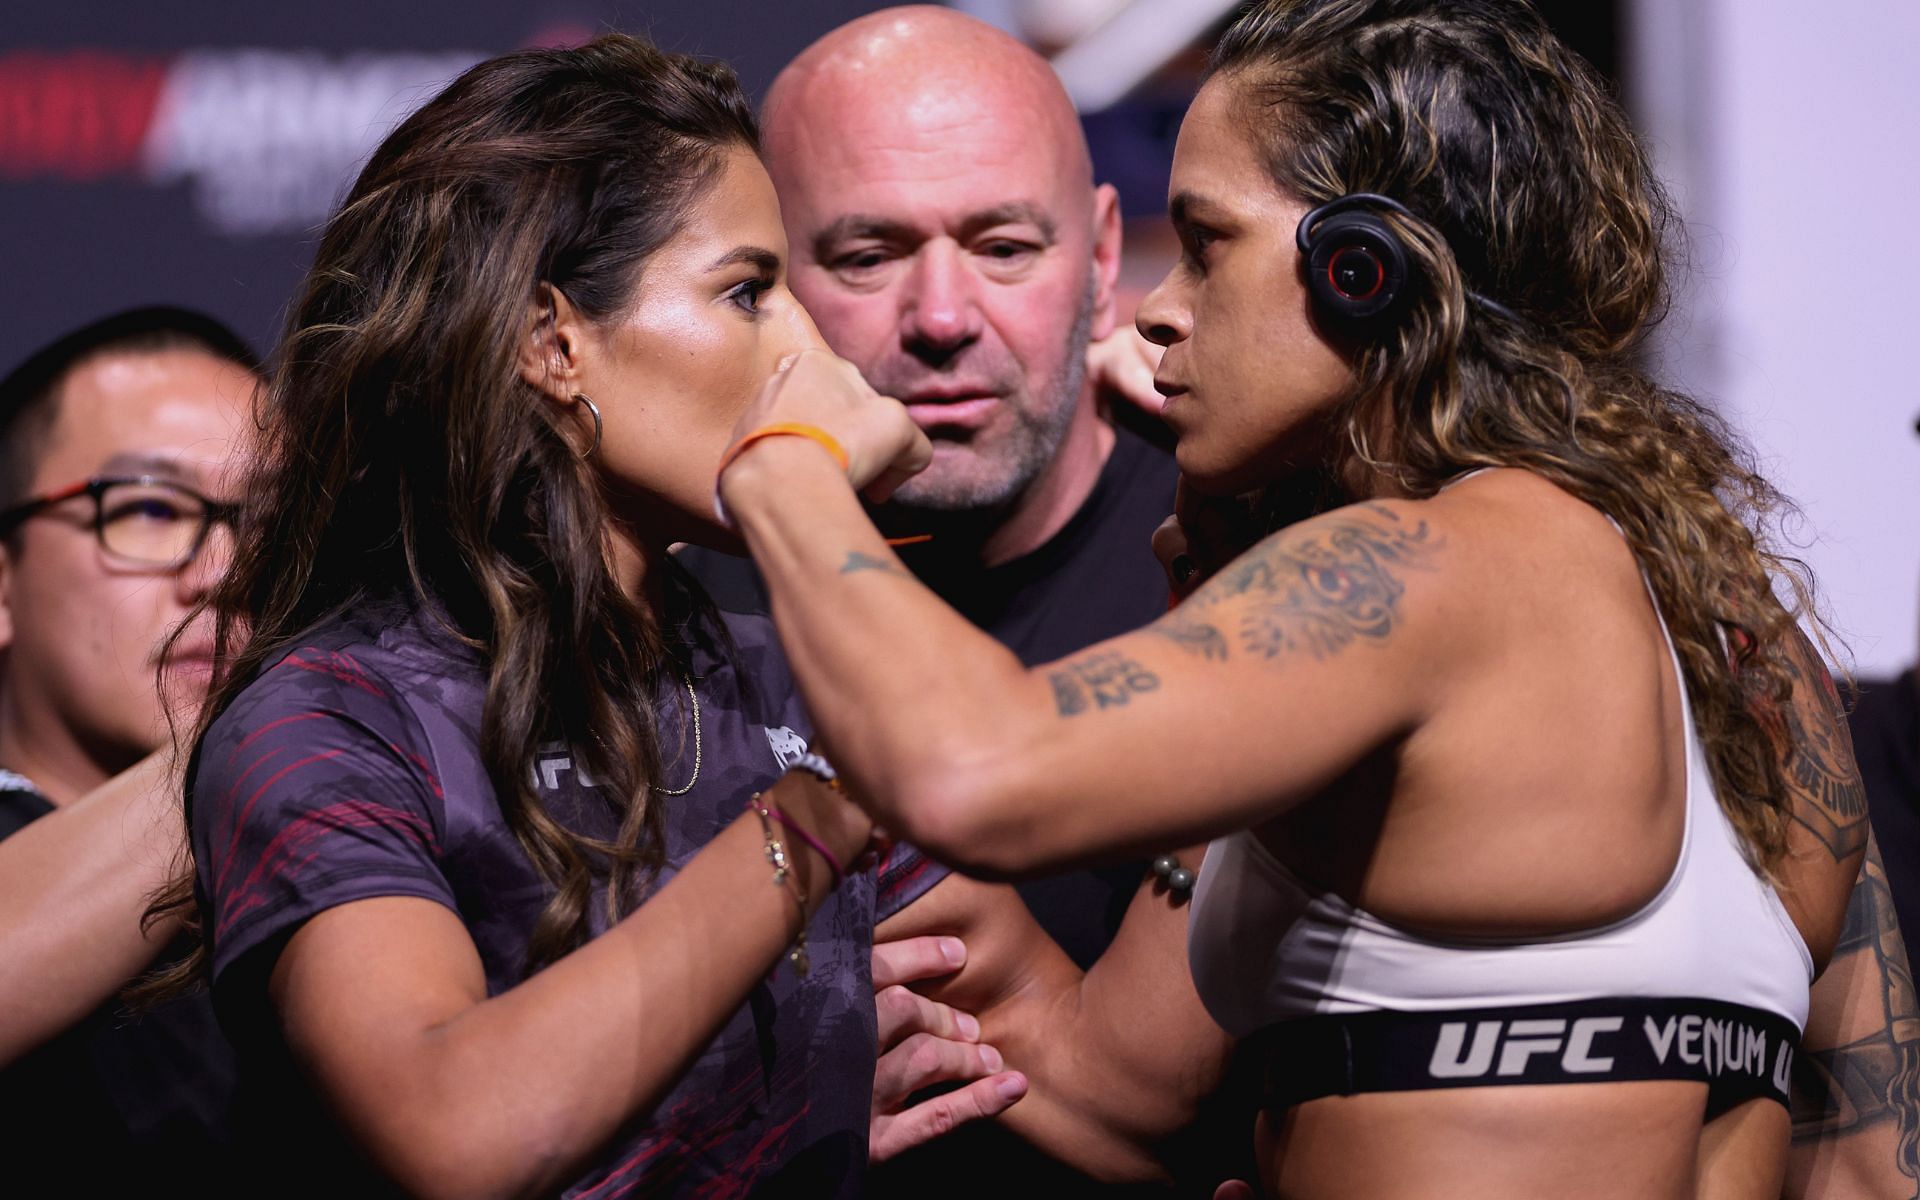 Julianna Pena (L) believes that her opponent Amanda Nunes (R) is embarrassed after her loss at UFC 269